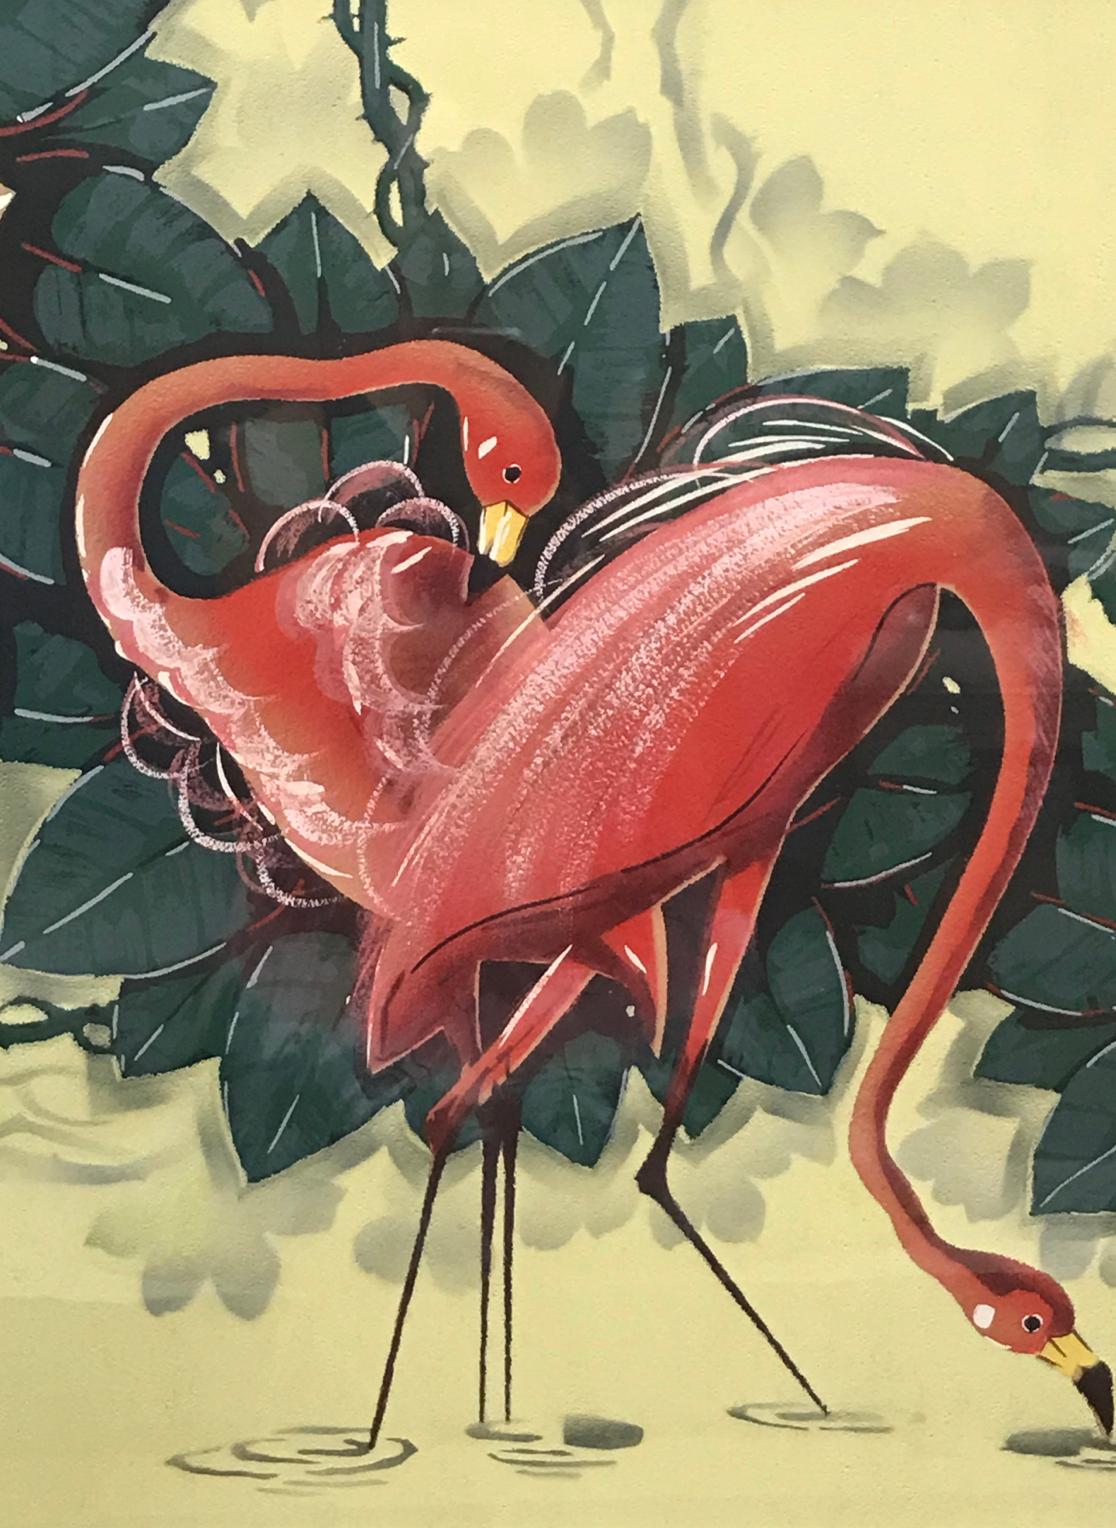 A original find of Billy Seay's Flamingos, this painting was commissioned by Turner Manufacturing Company, Circa 1940's. It is an airbrush over a print. Very cool concept.
An of course Pink Flamingos is such a great subject and always makes for an